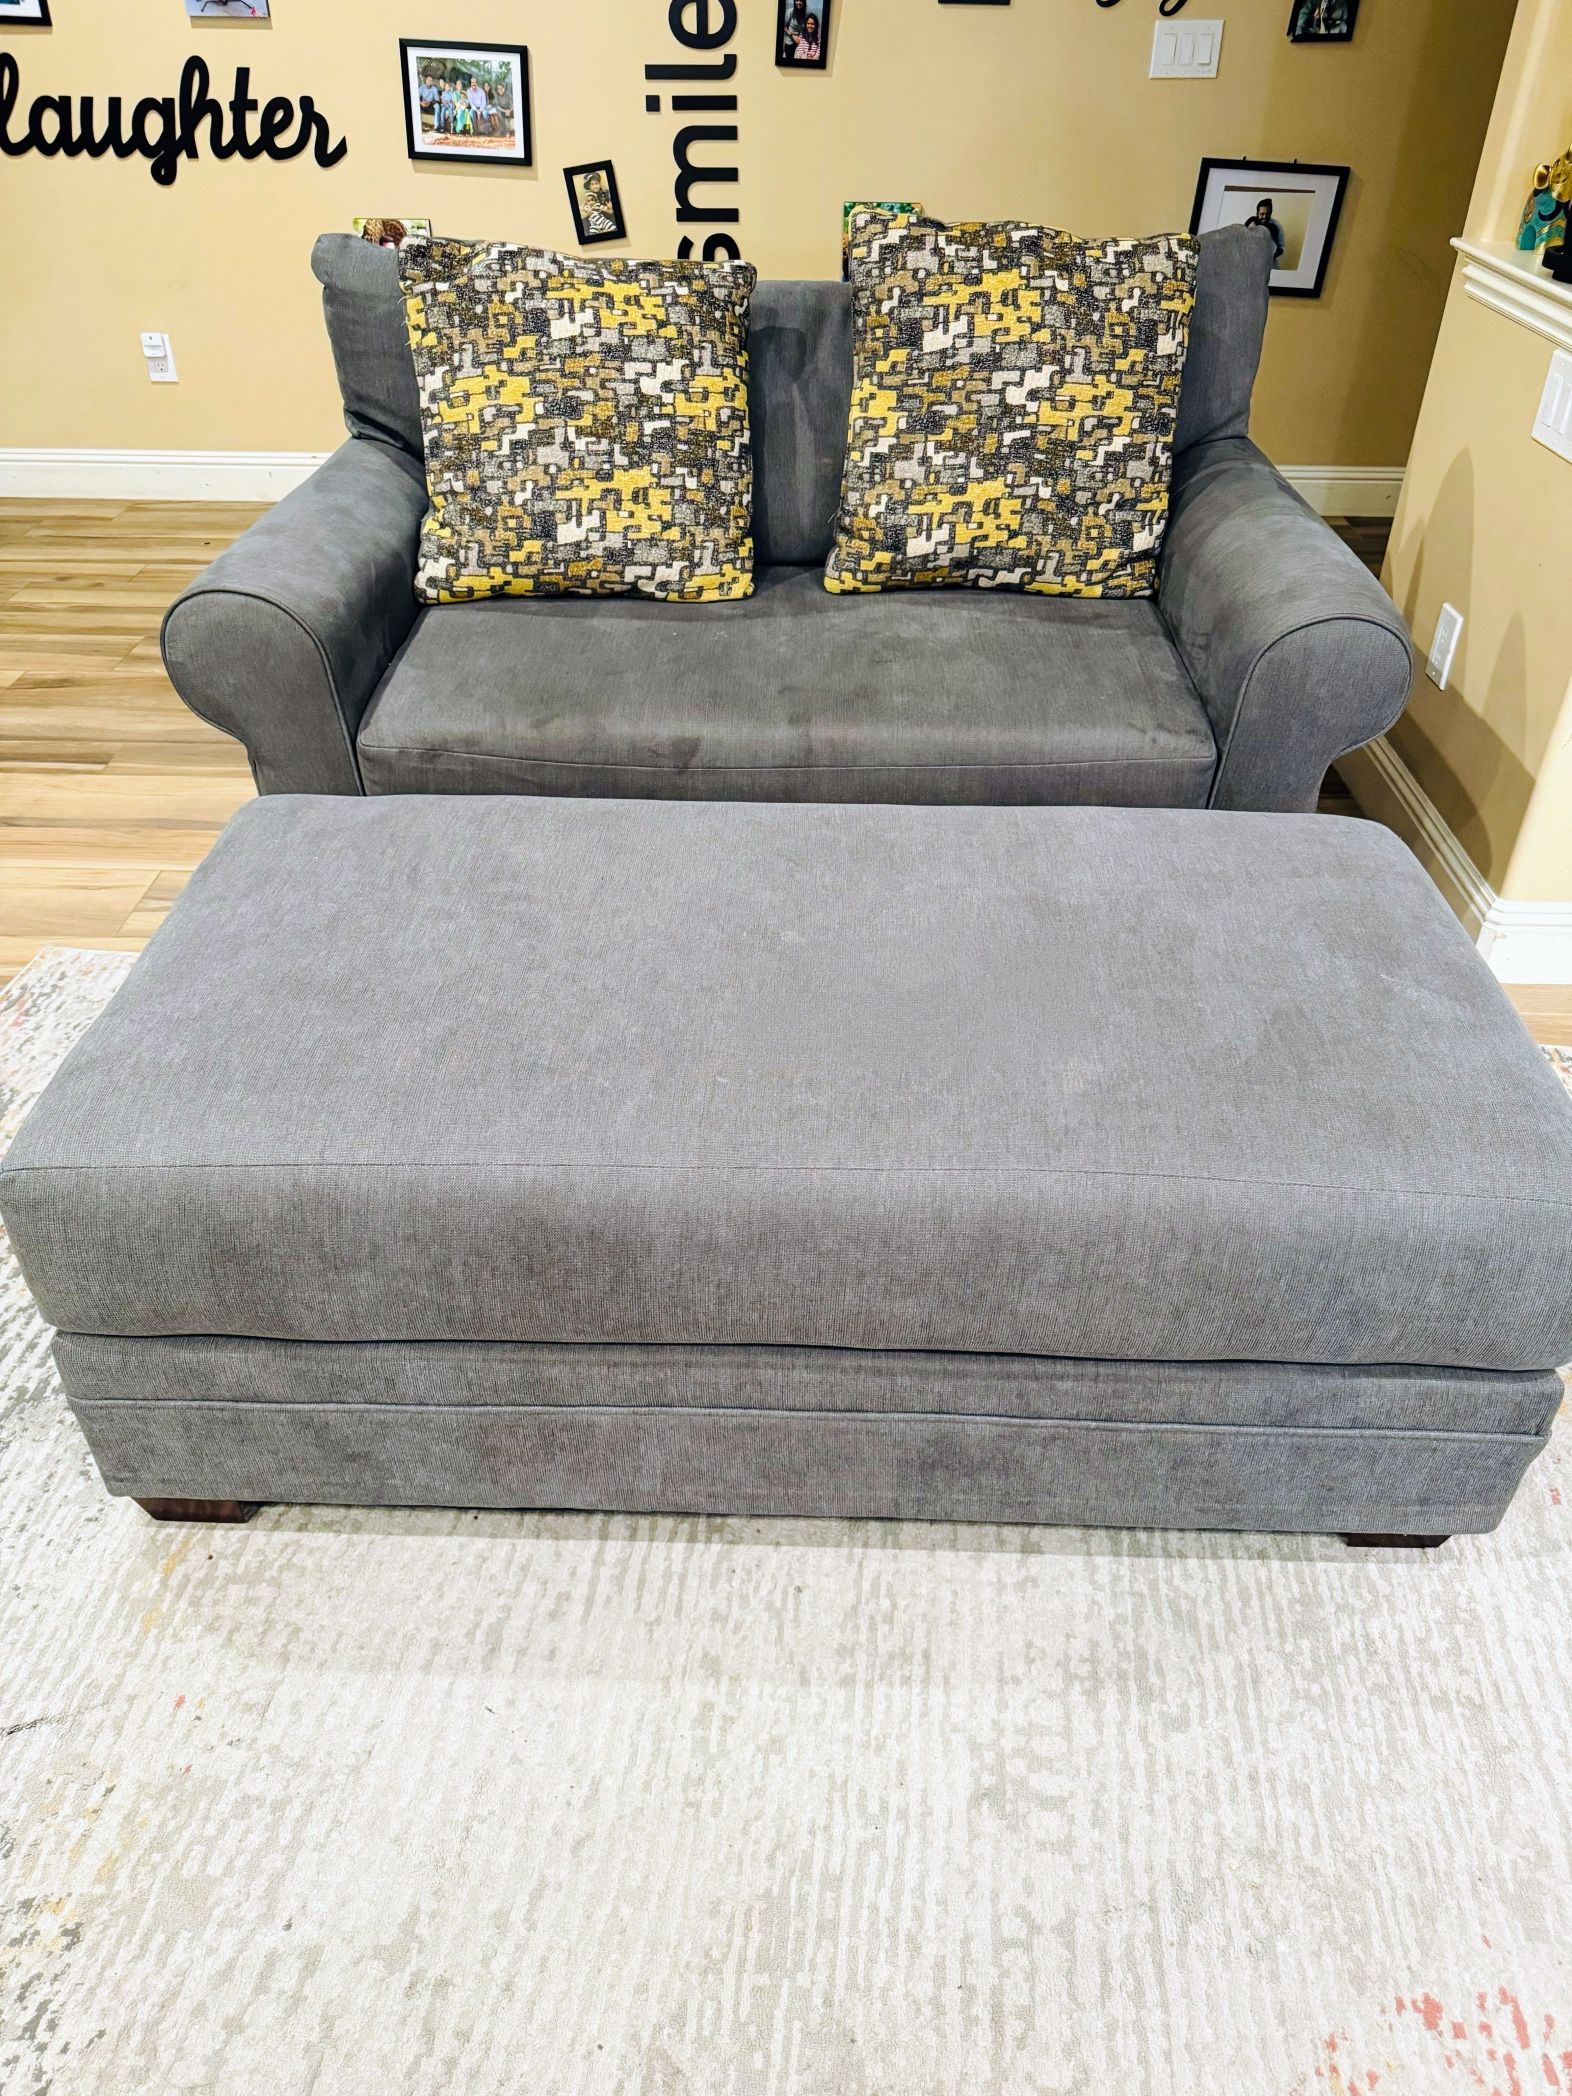 Oversized Living room Accent Chair + Leg Rest 